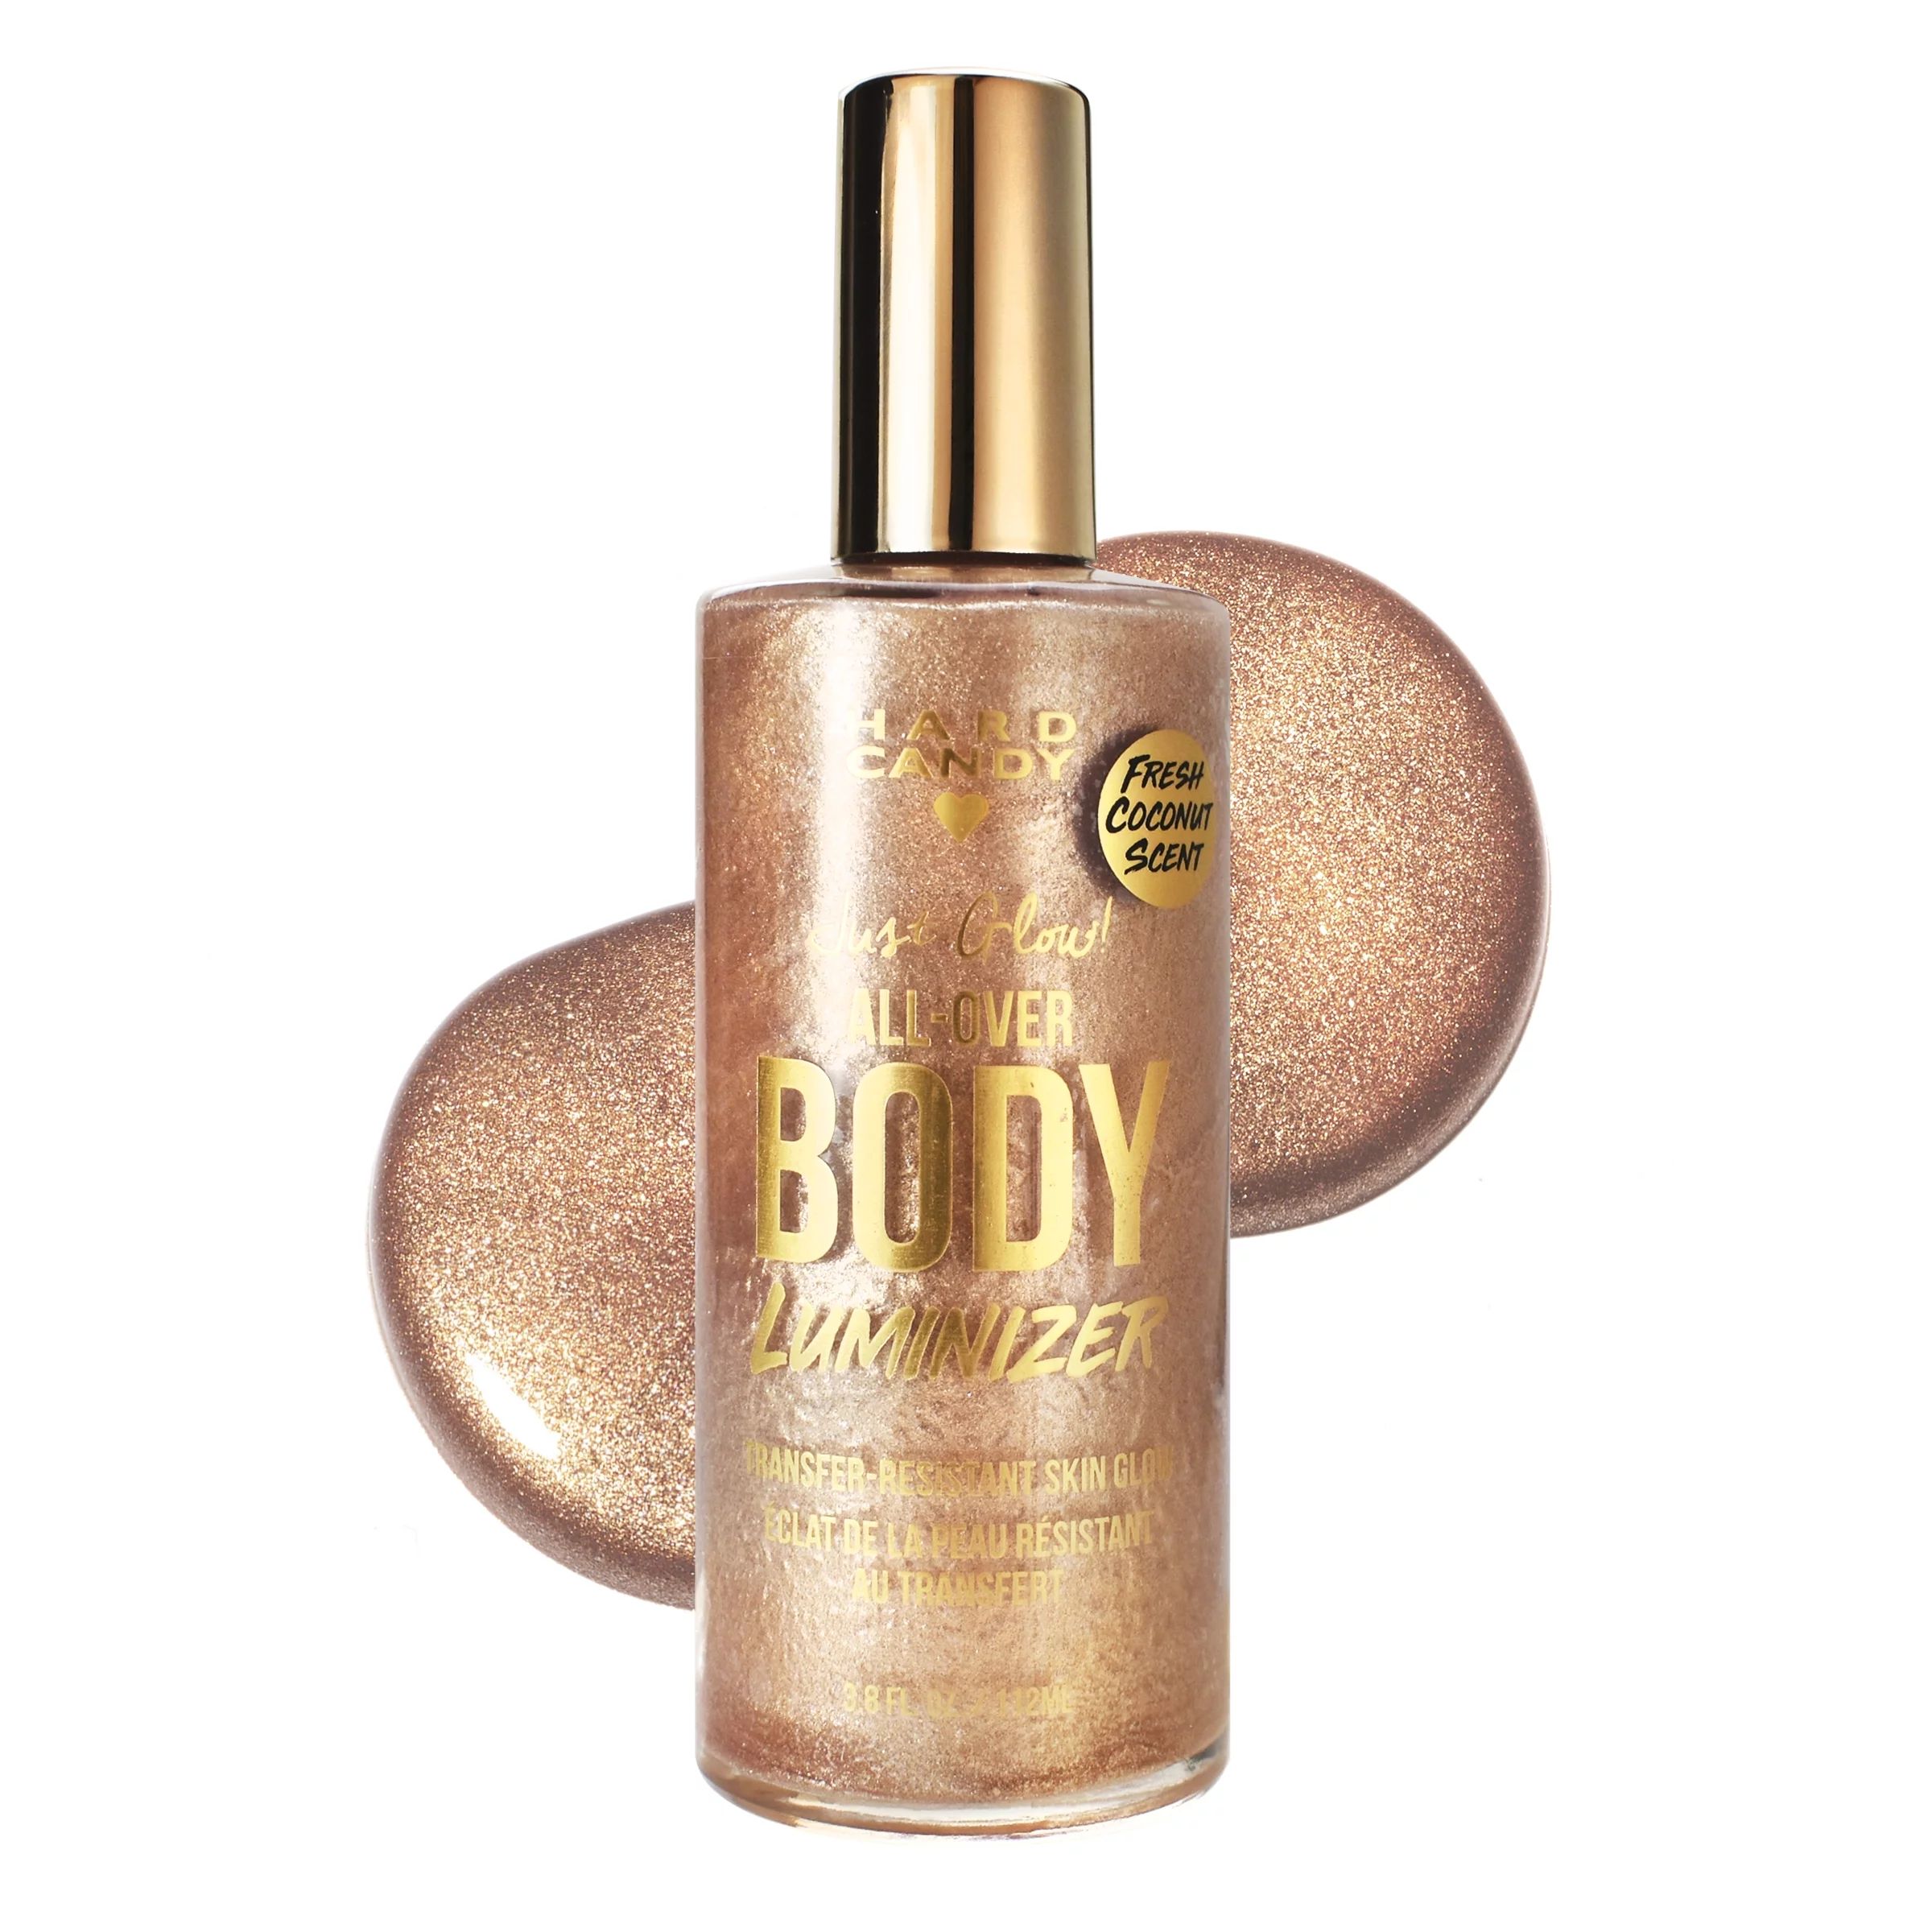 "Hard Candy Sheer Envy All Over Body Luminizer Champagne, 1556" | Walmart (US)